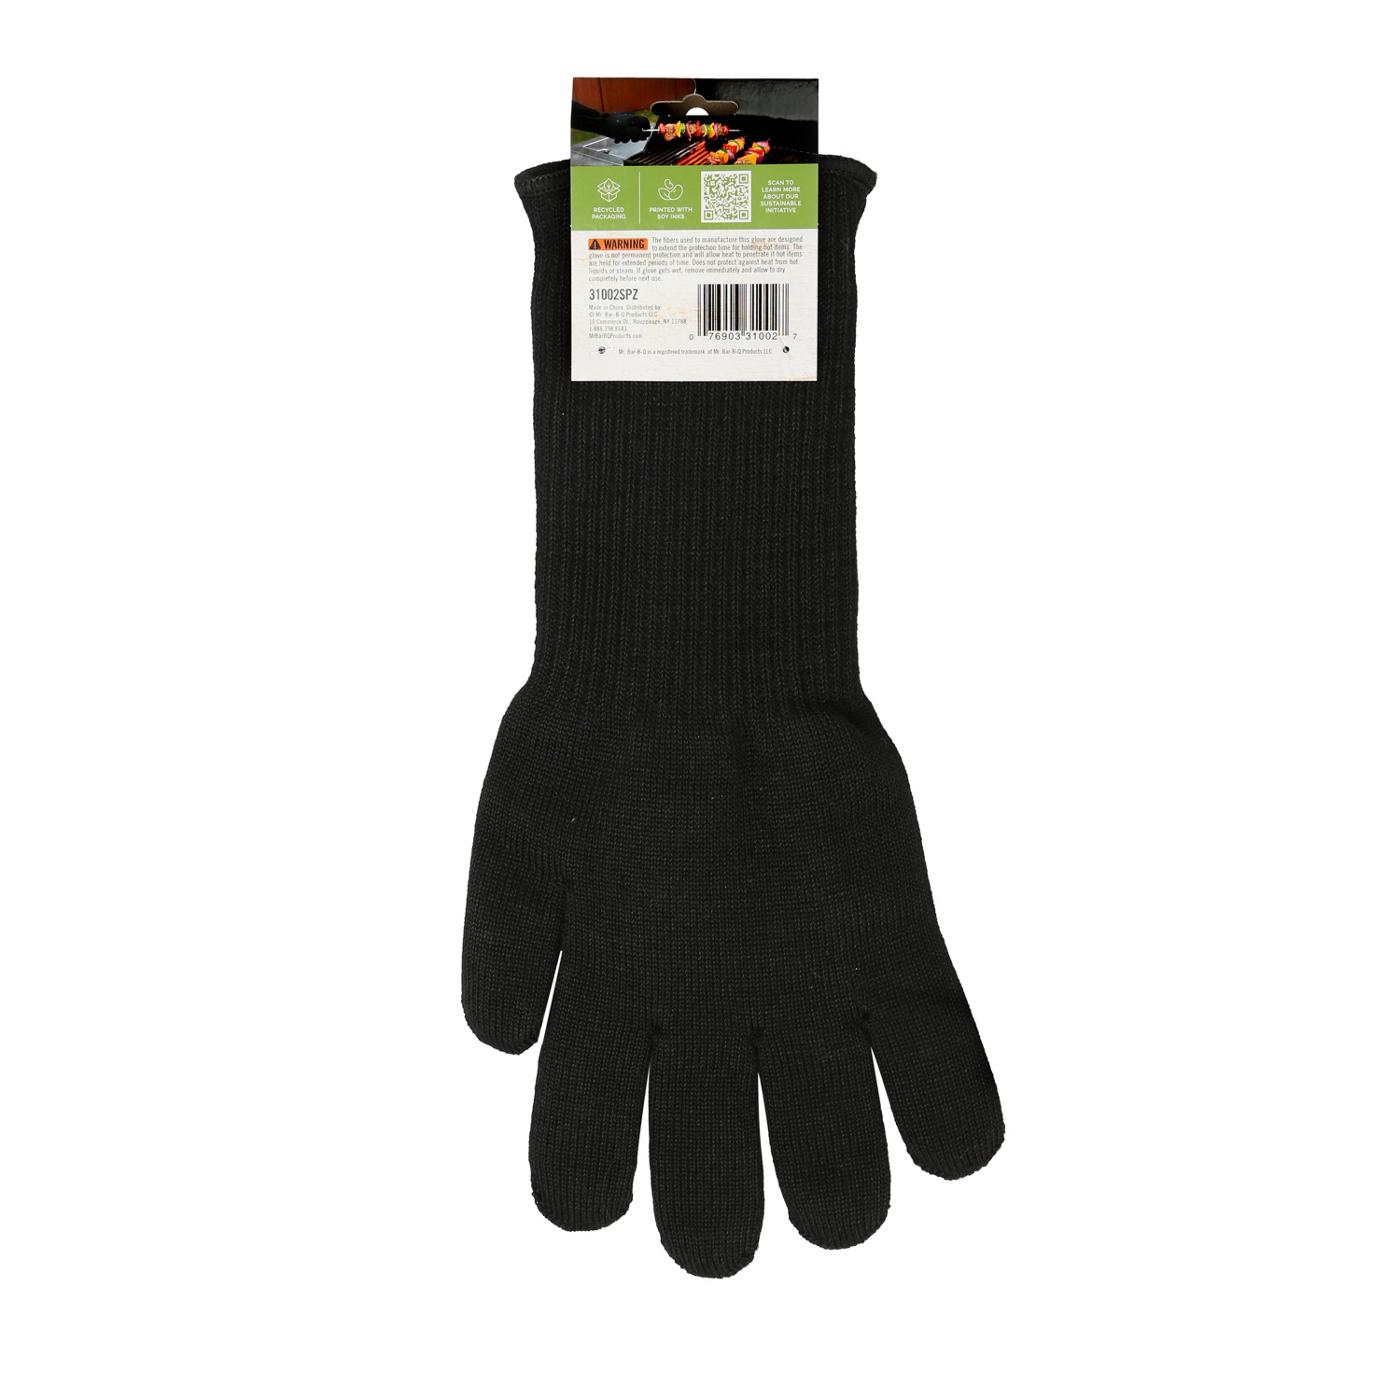 Mr. Bar-B-Q Eco Series Extra Long Heat Resistant Glove; image 2 of 2